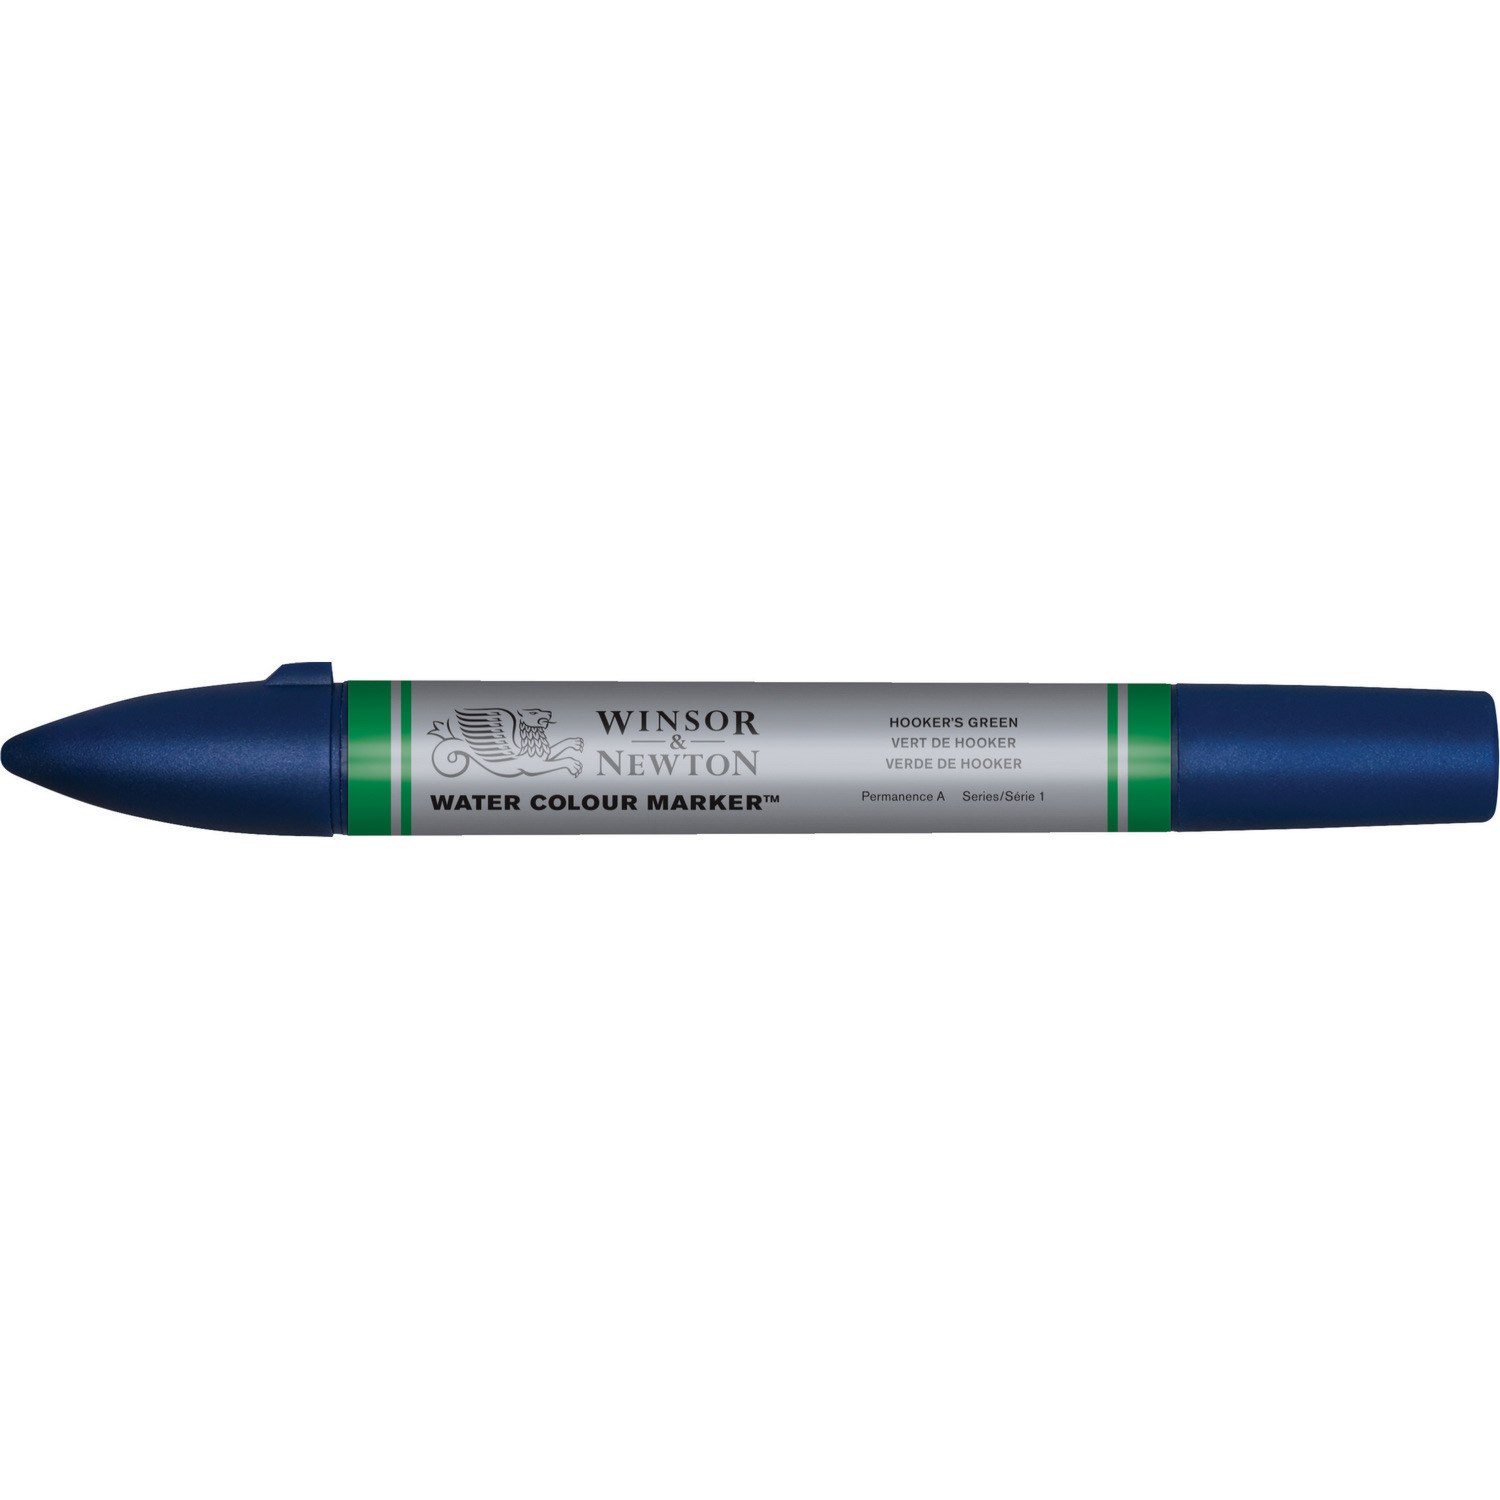 Winsor and Newton Water Colour Marker - Hookers Green Image 1